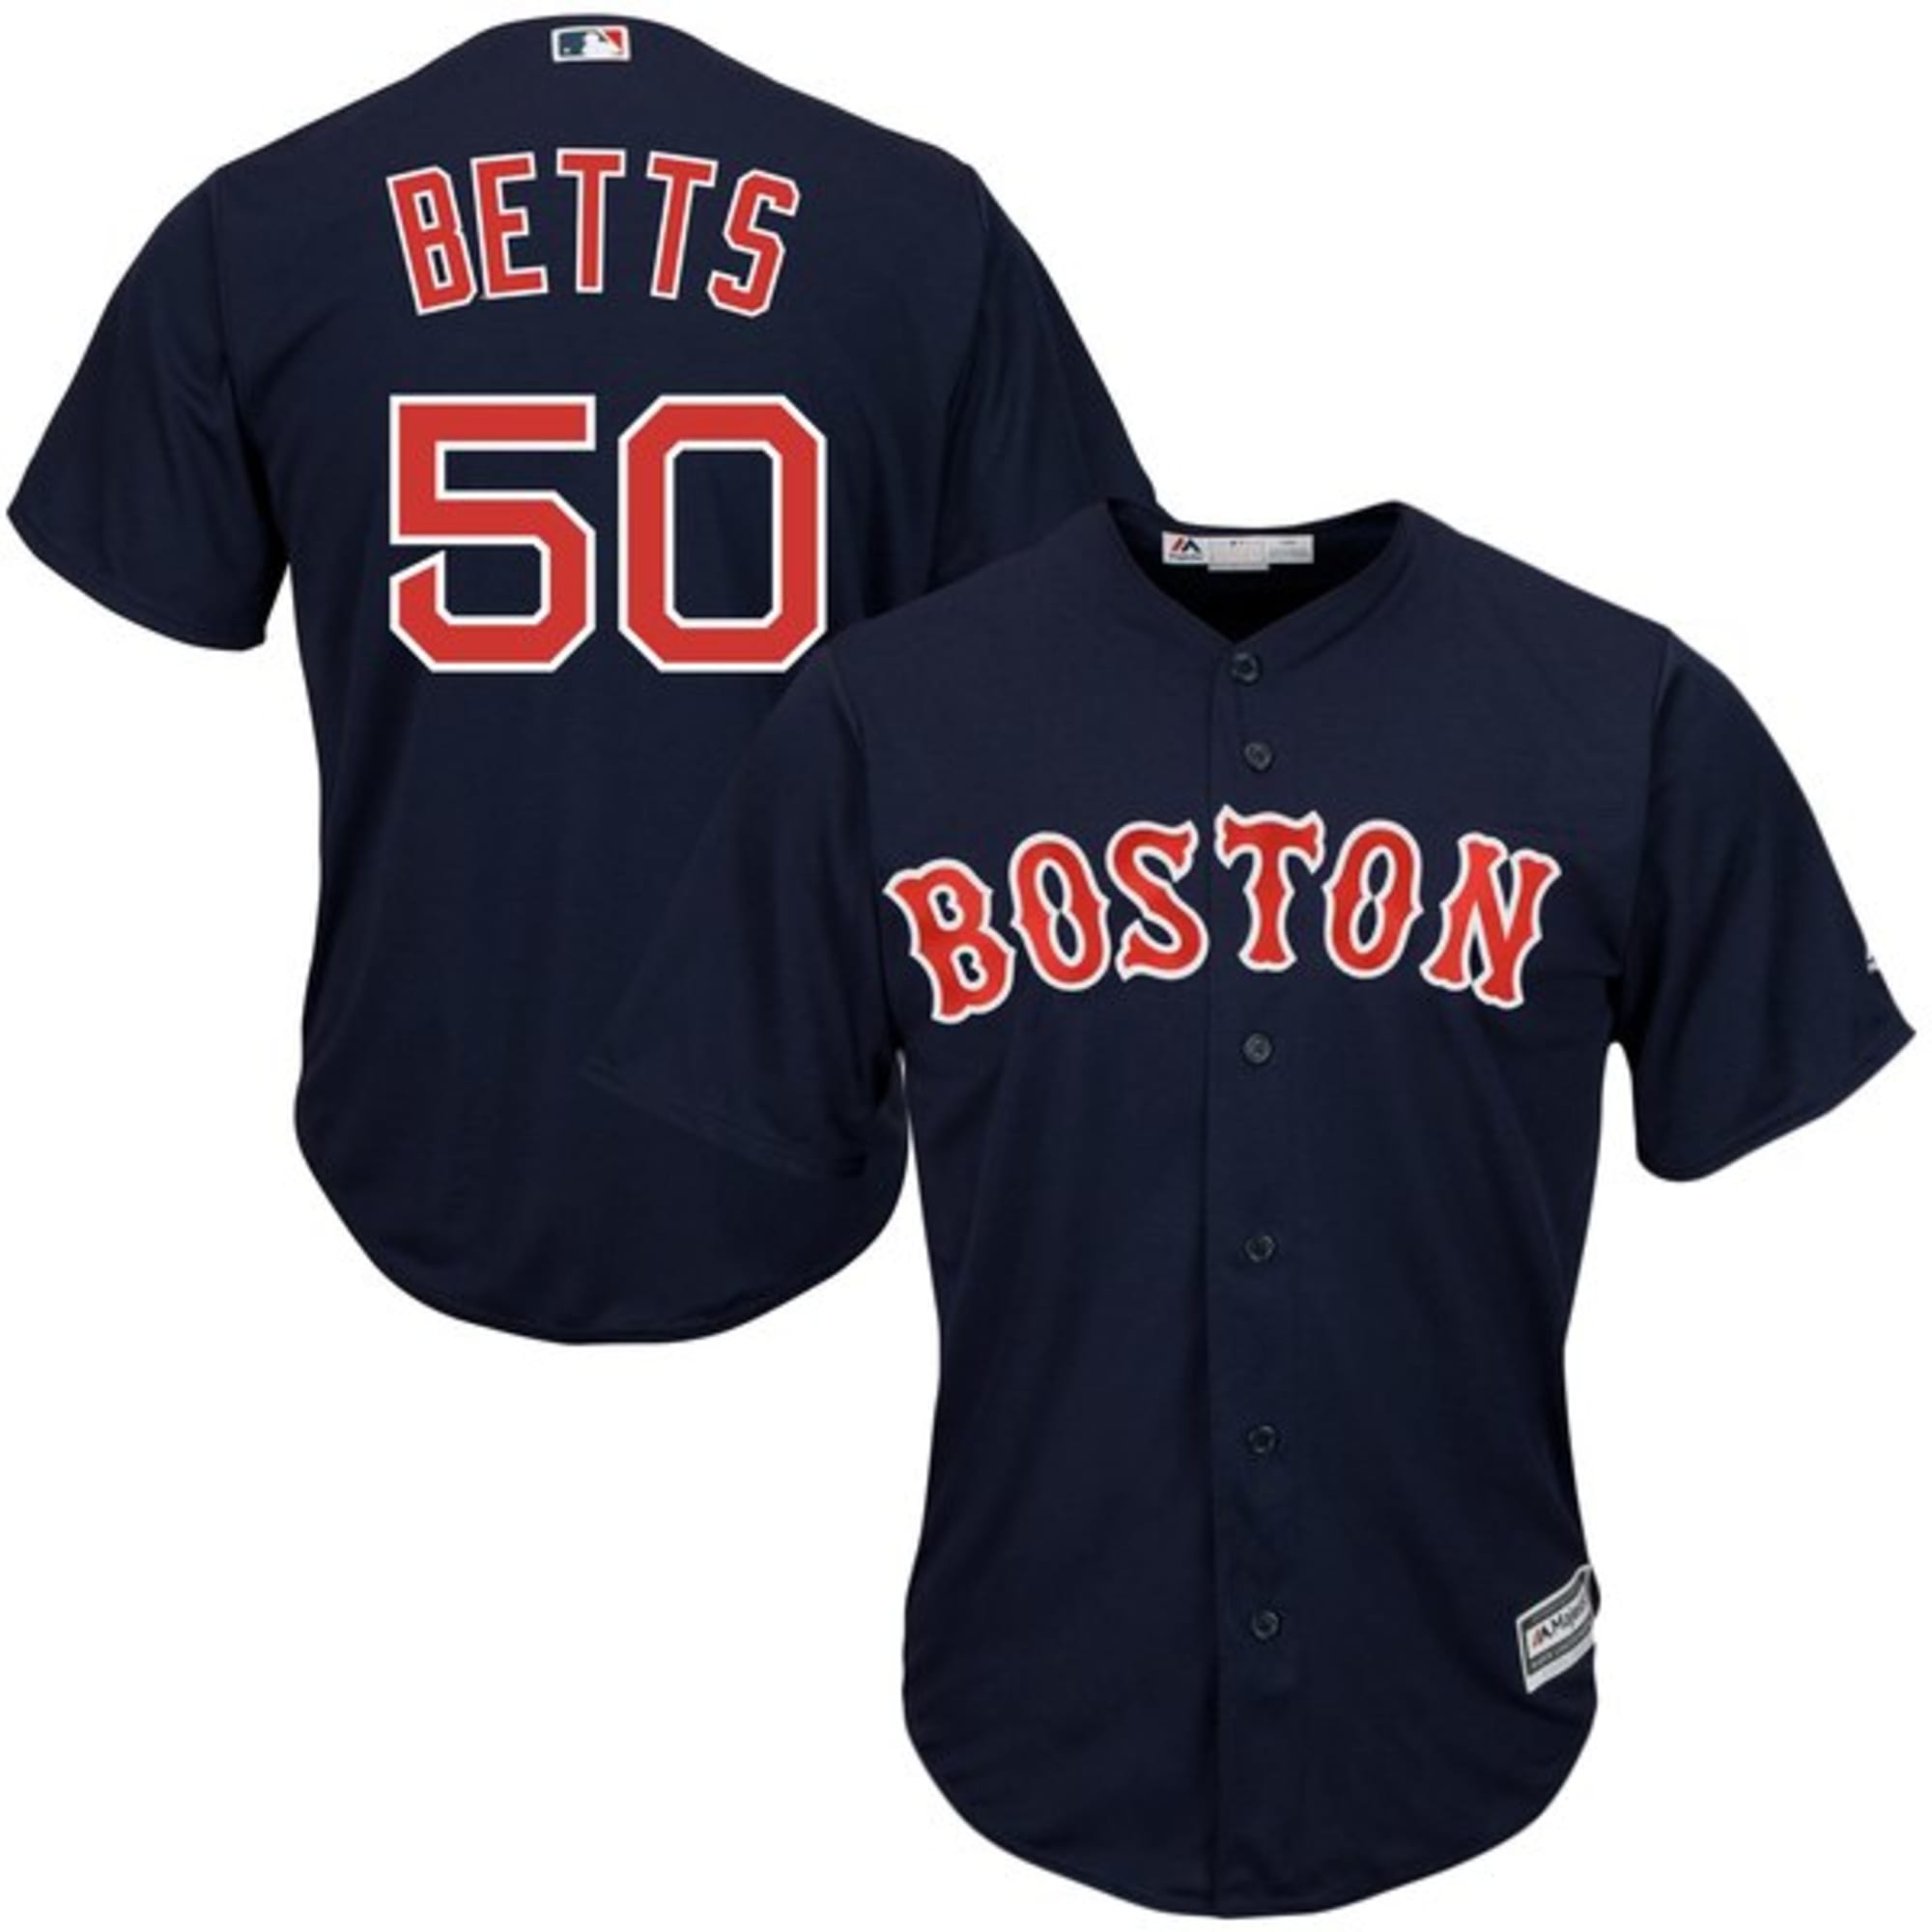 jersey boston red sox 2019